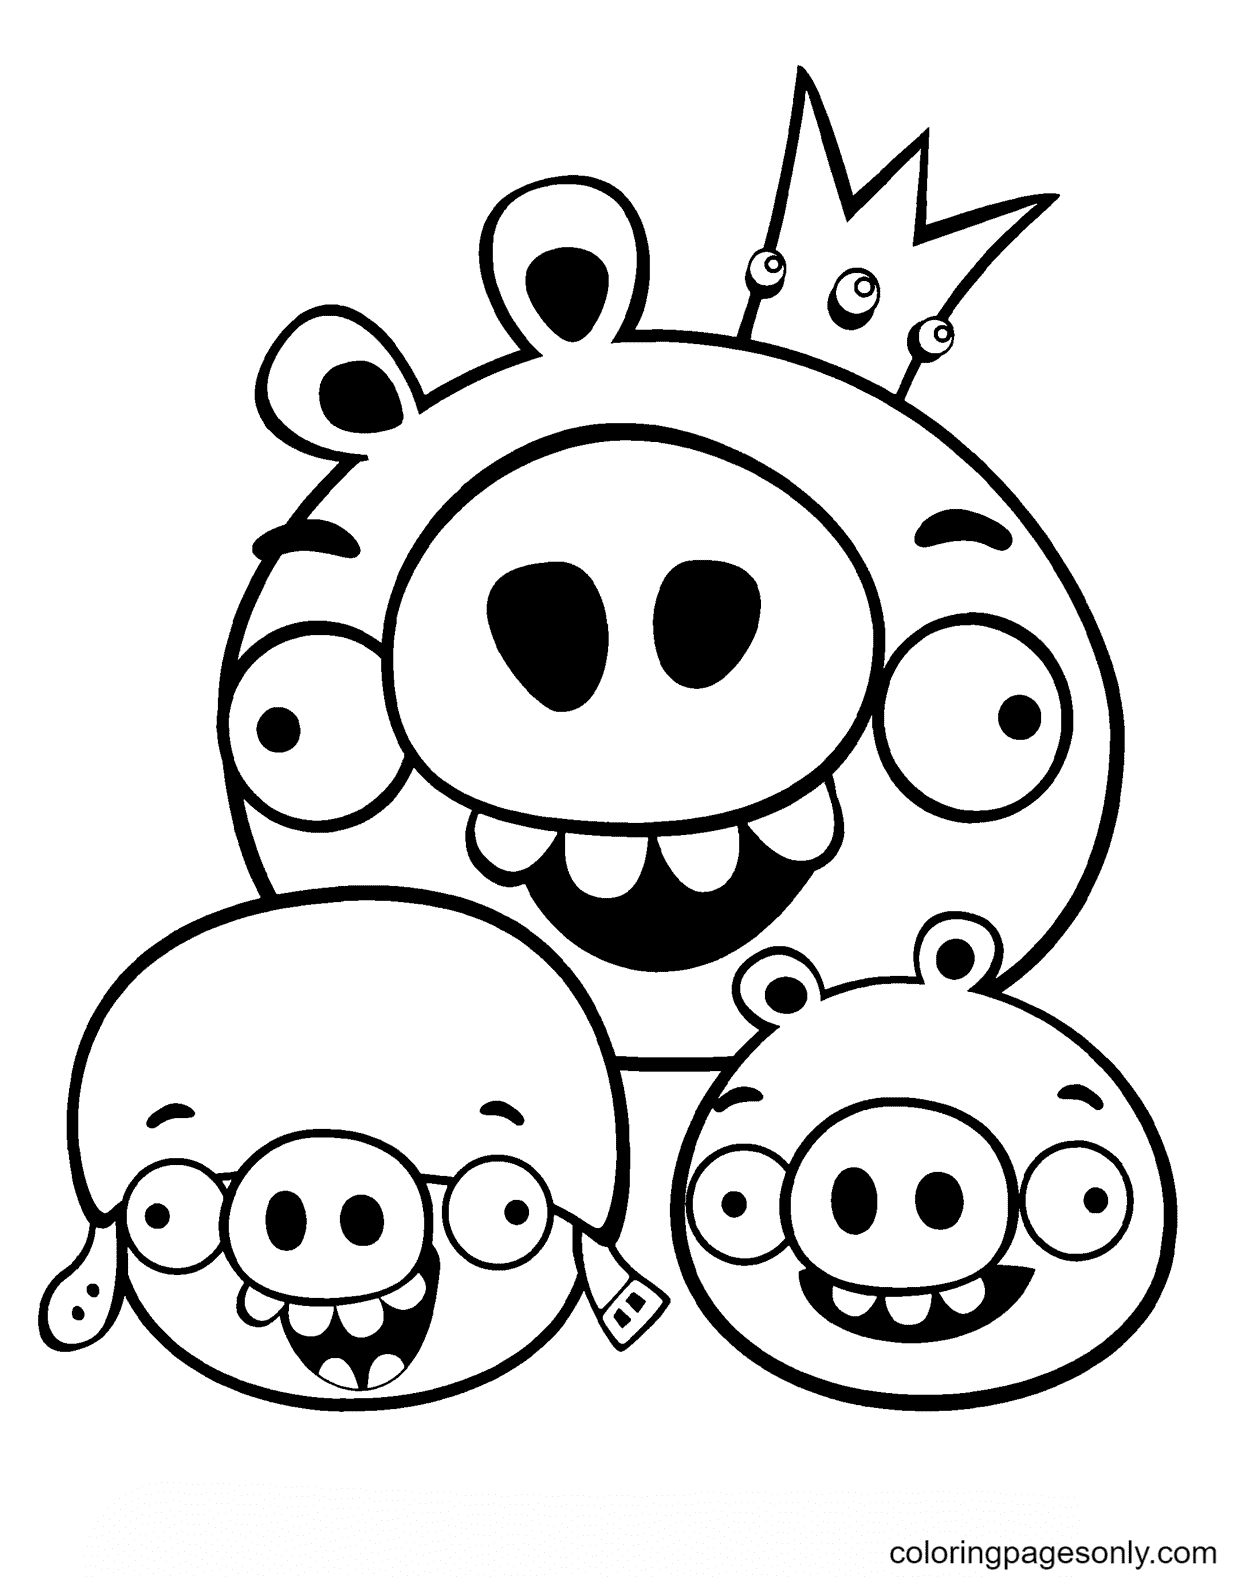 King Pig, Corporal and Minion Coloring Pages